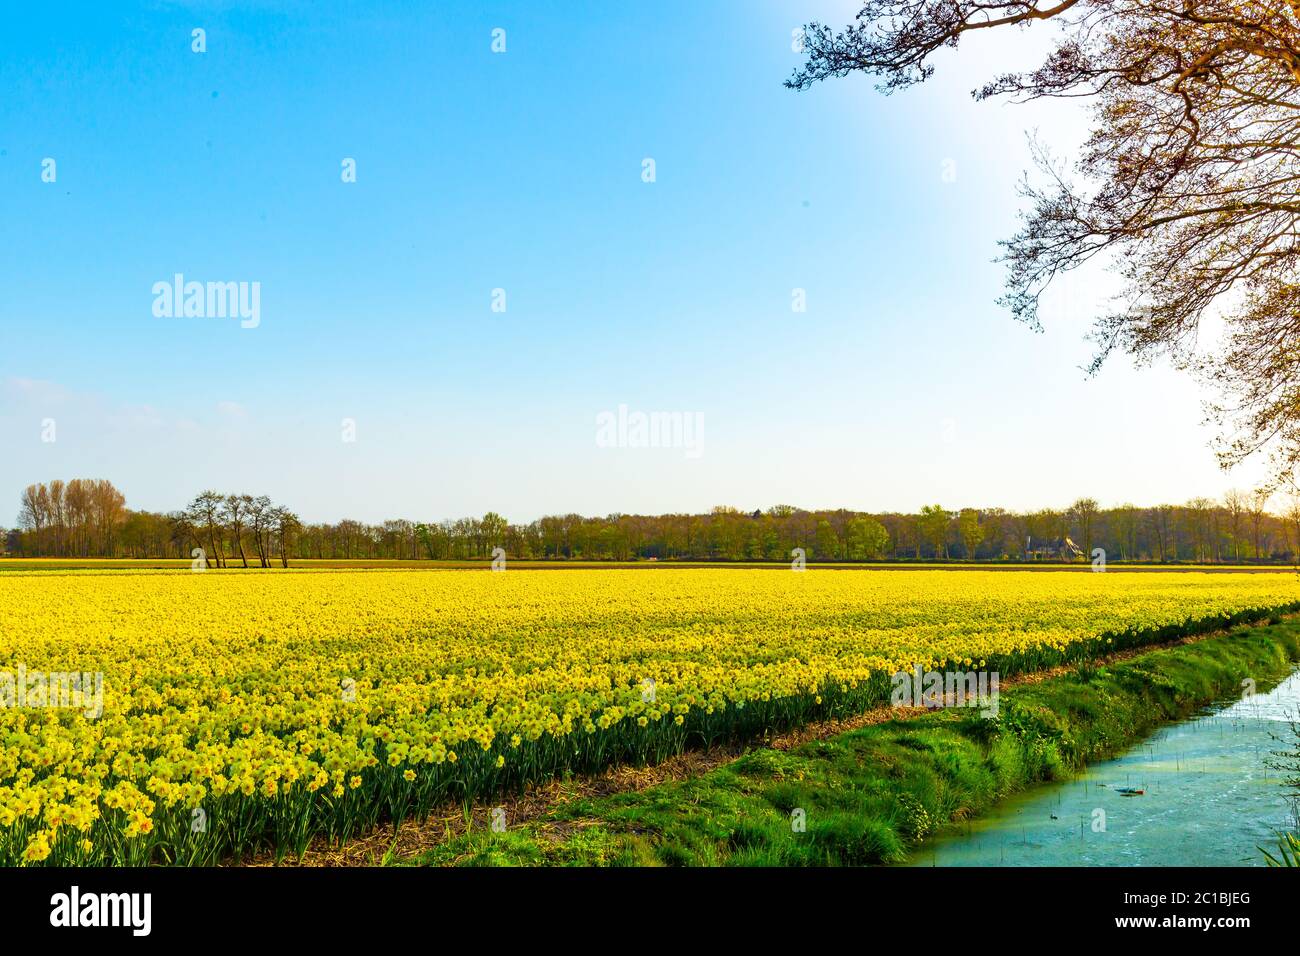 beautiful Narcissus deffodils flower field in the netherlands farming Stock Photo